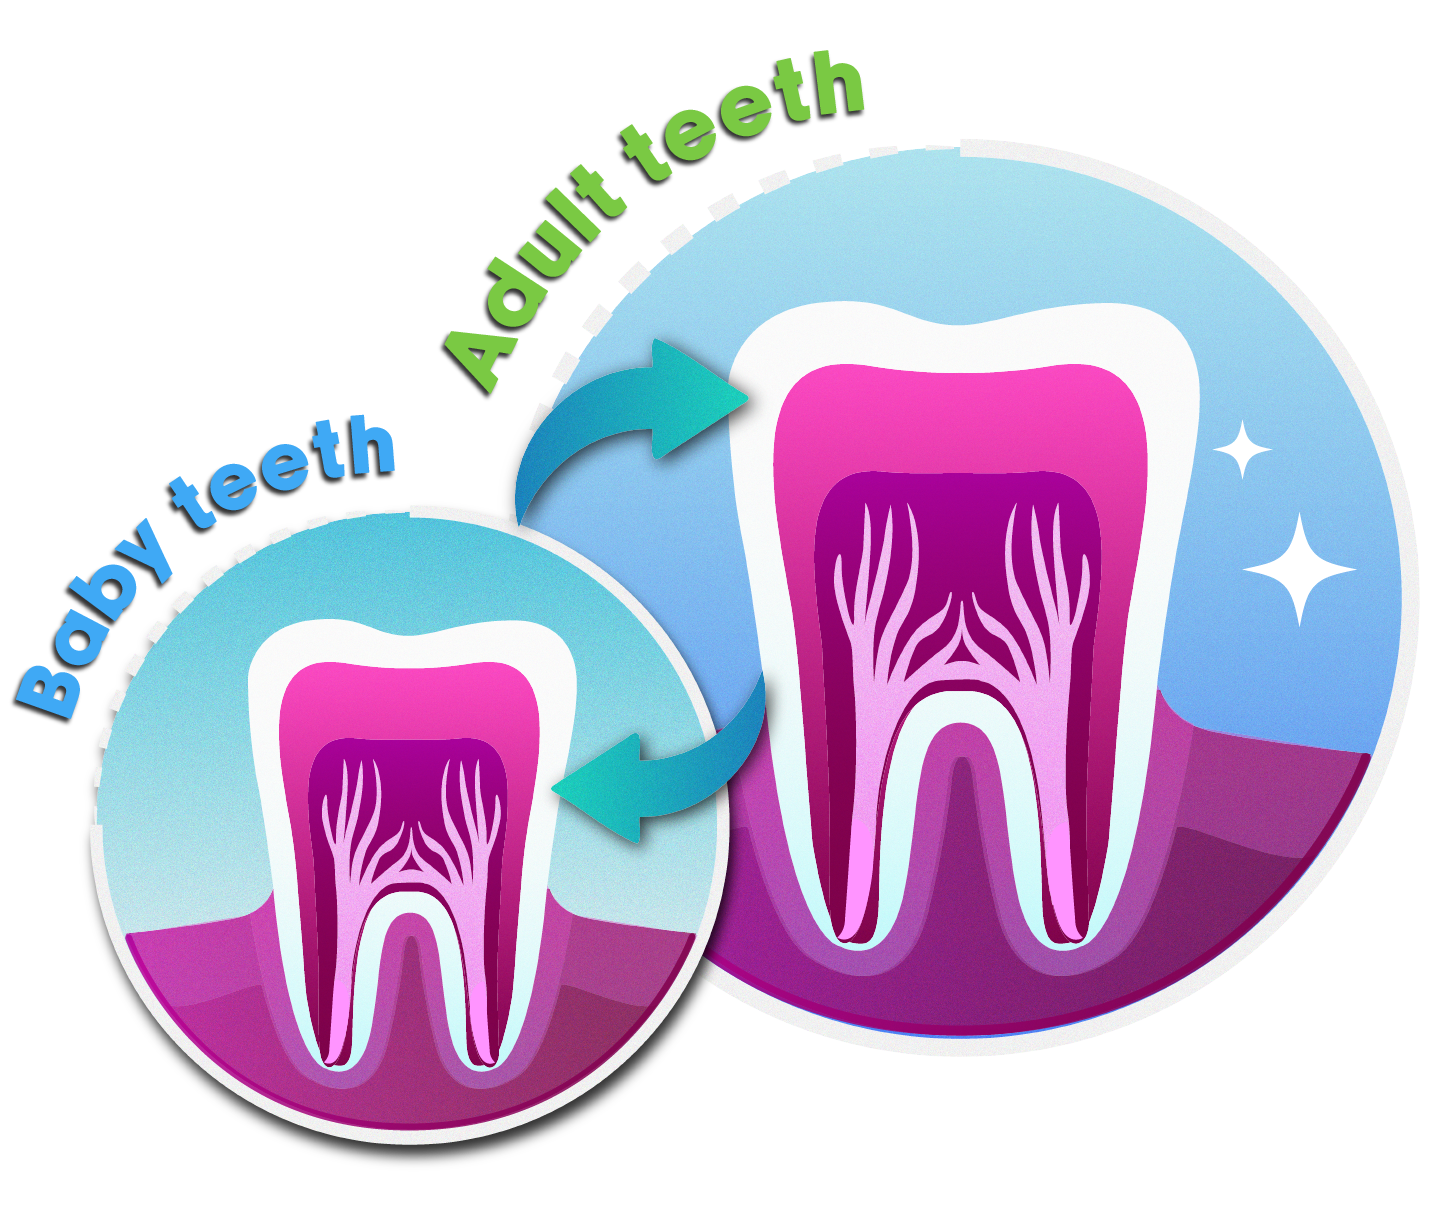 Illustration of a smaller baby tooth next to a larger adult tooth